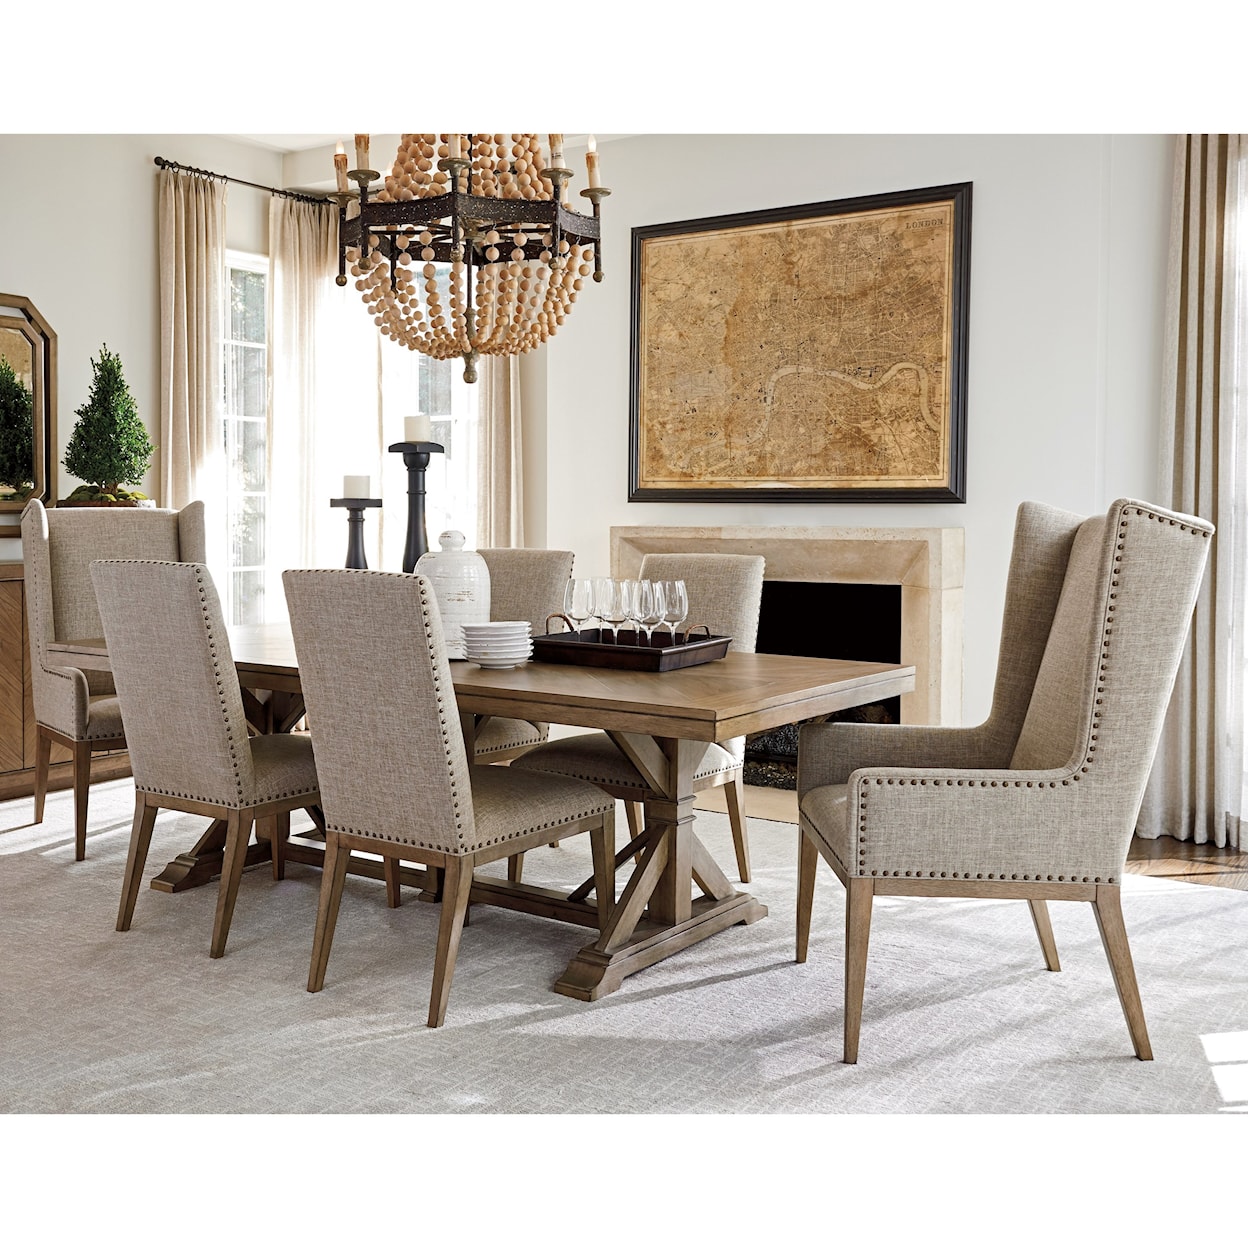 Tommy Bahama Home Cypress Point 7 Pc Dining Set